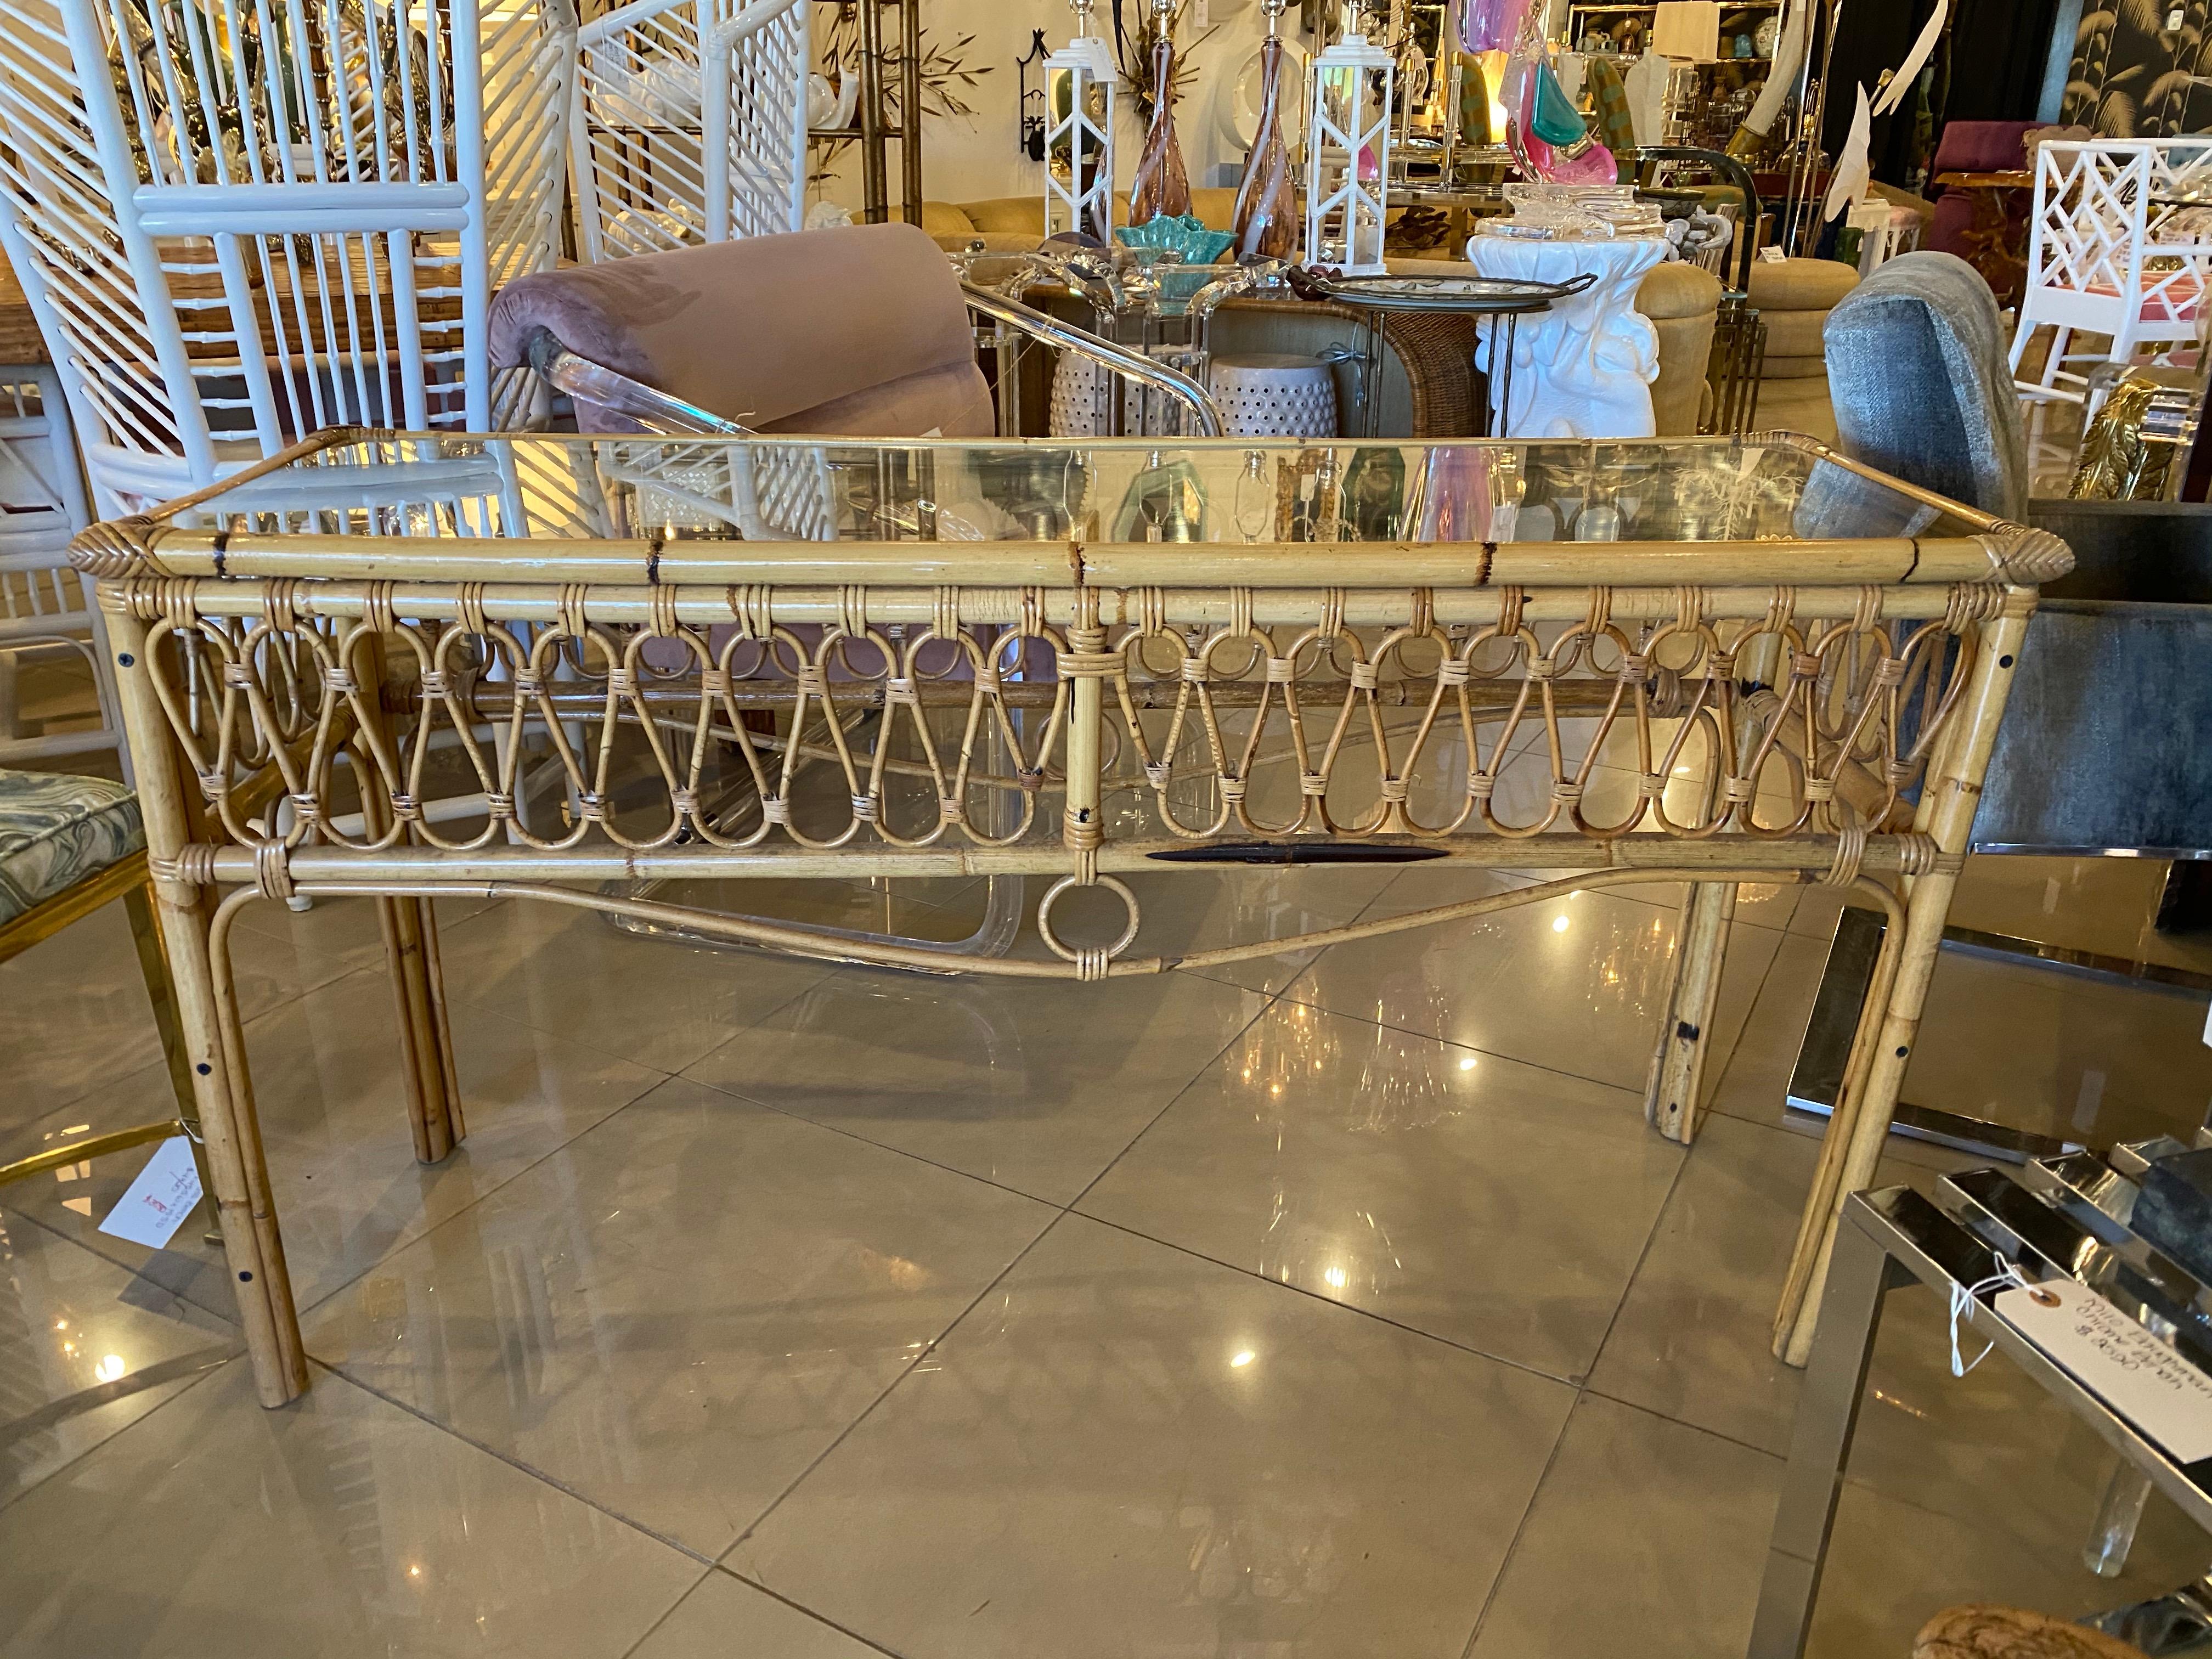 Vintage rattan console table with glass top. No missing or broken pieces of rattan.